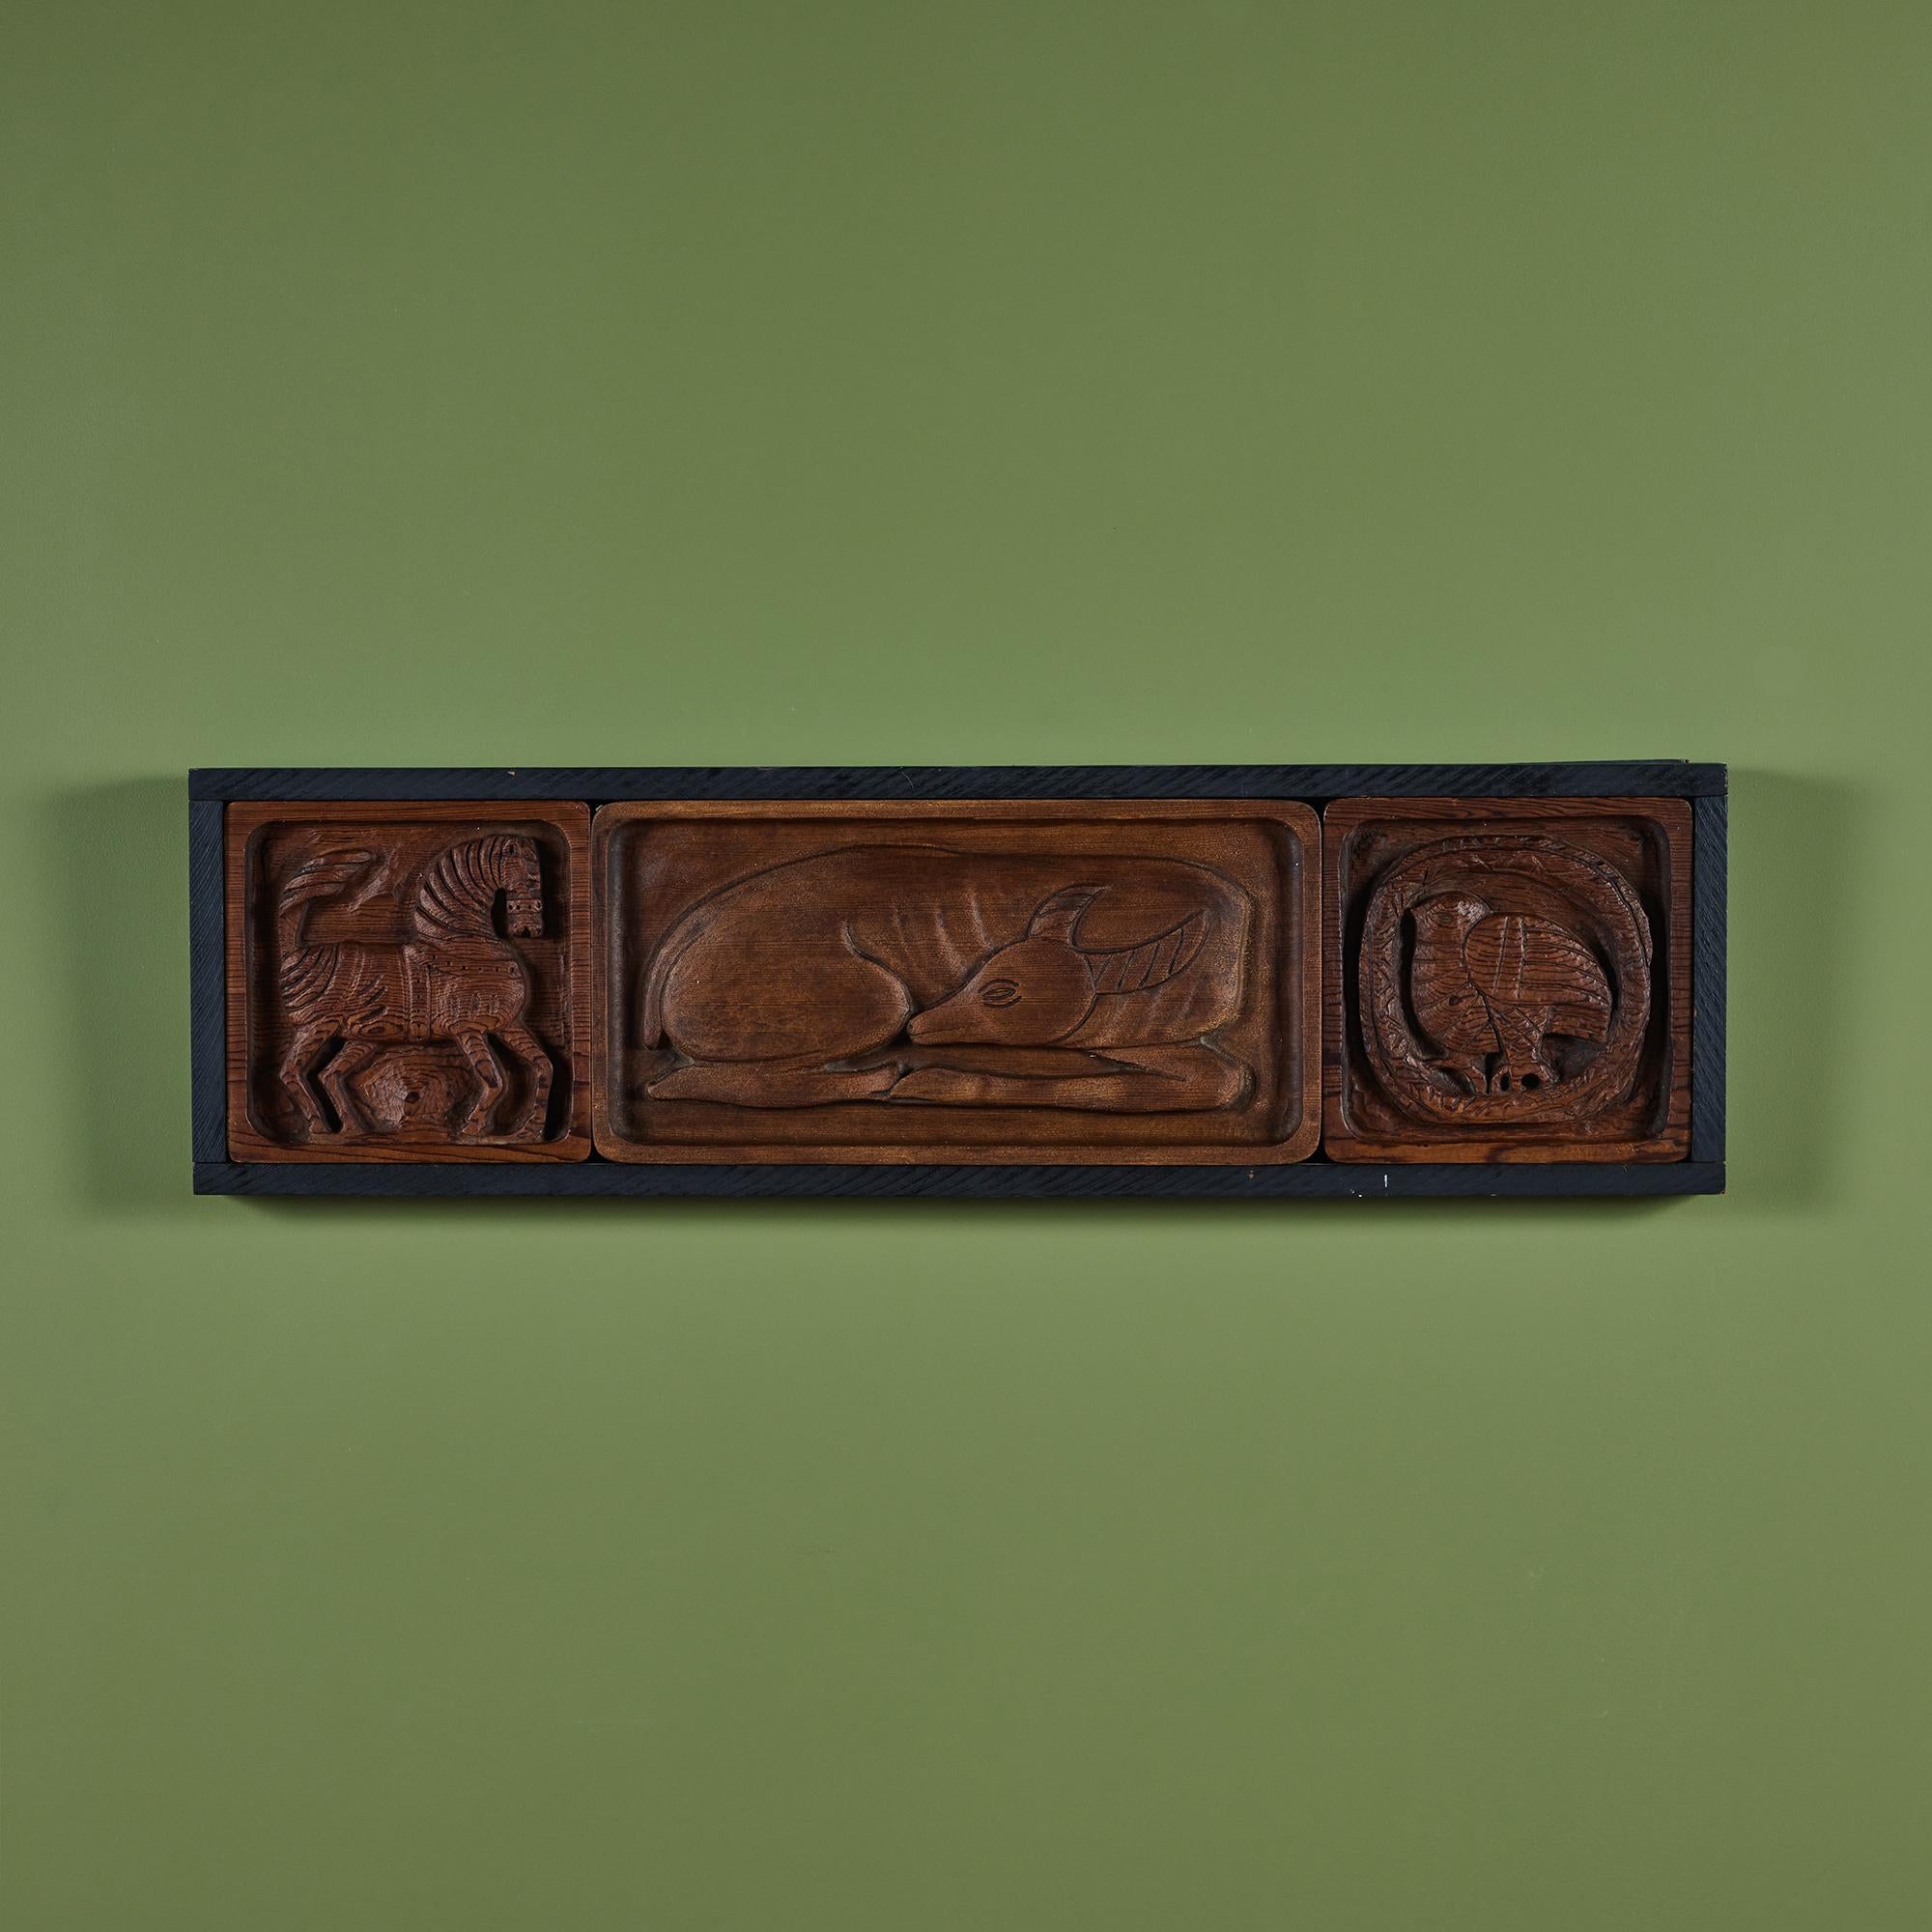 Wood carving by California artist, Evelyn Ackerman, c.1960s. This carving features three animals, a zebra, an antelope and an owl in a rectangular ebonized wood frame.

Dimensions 
40